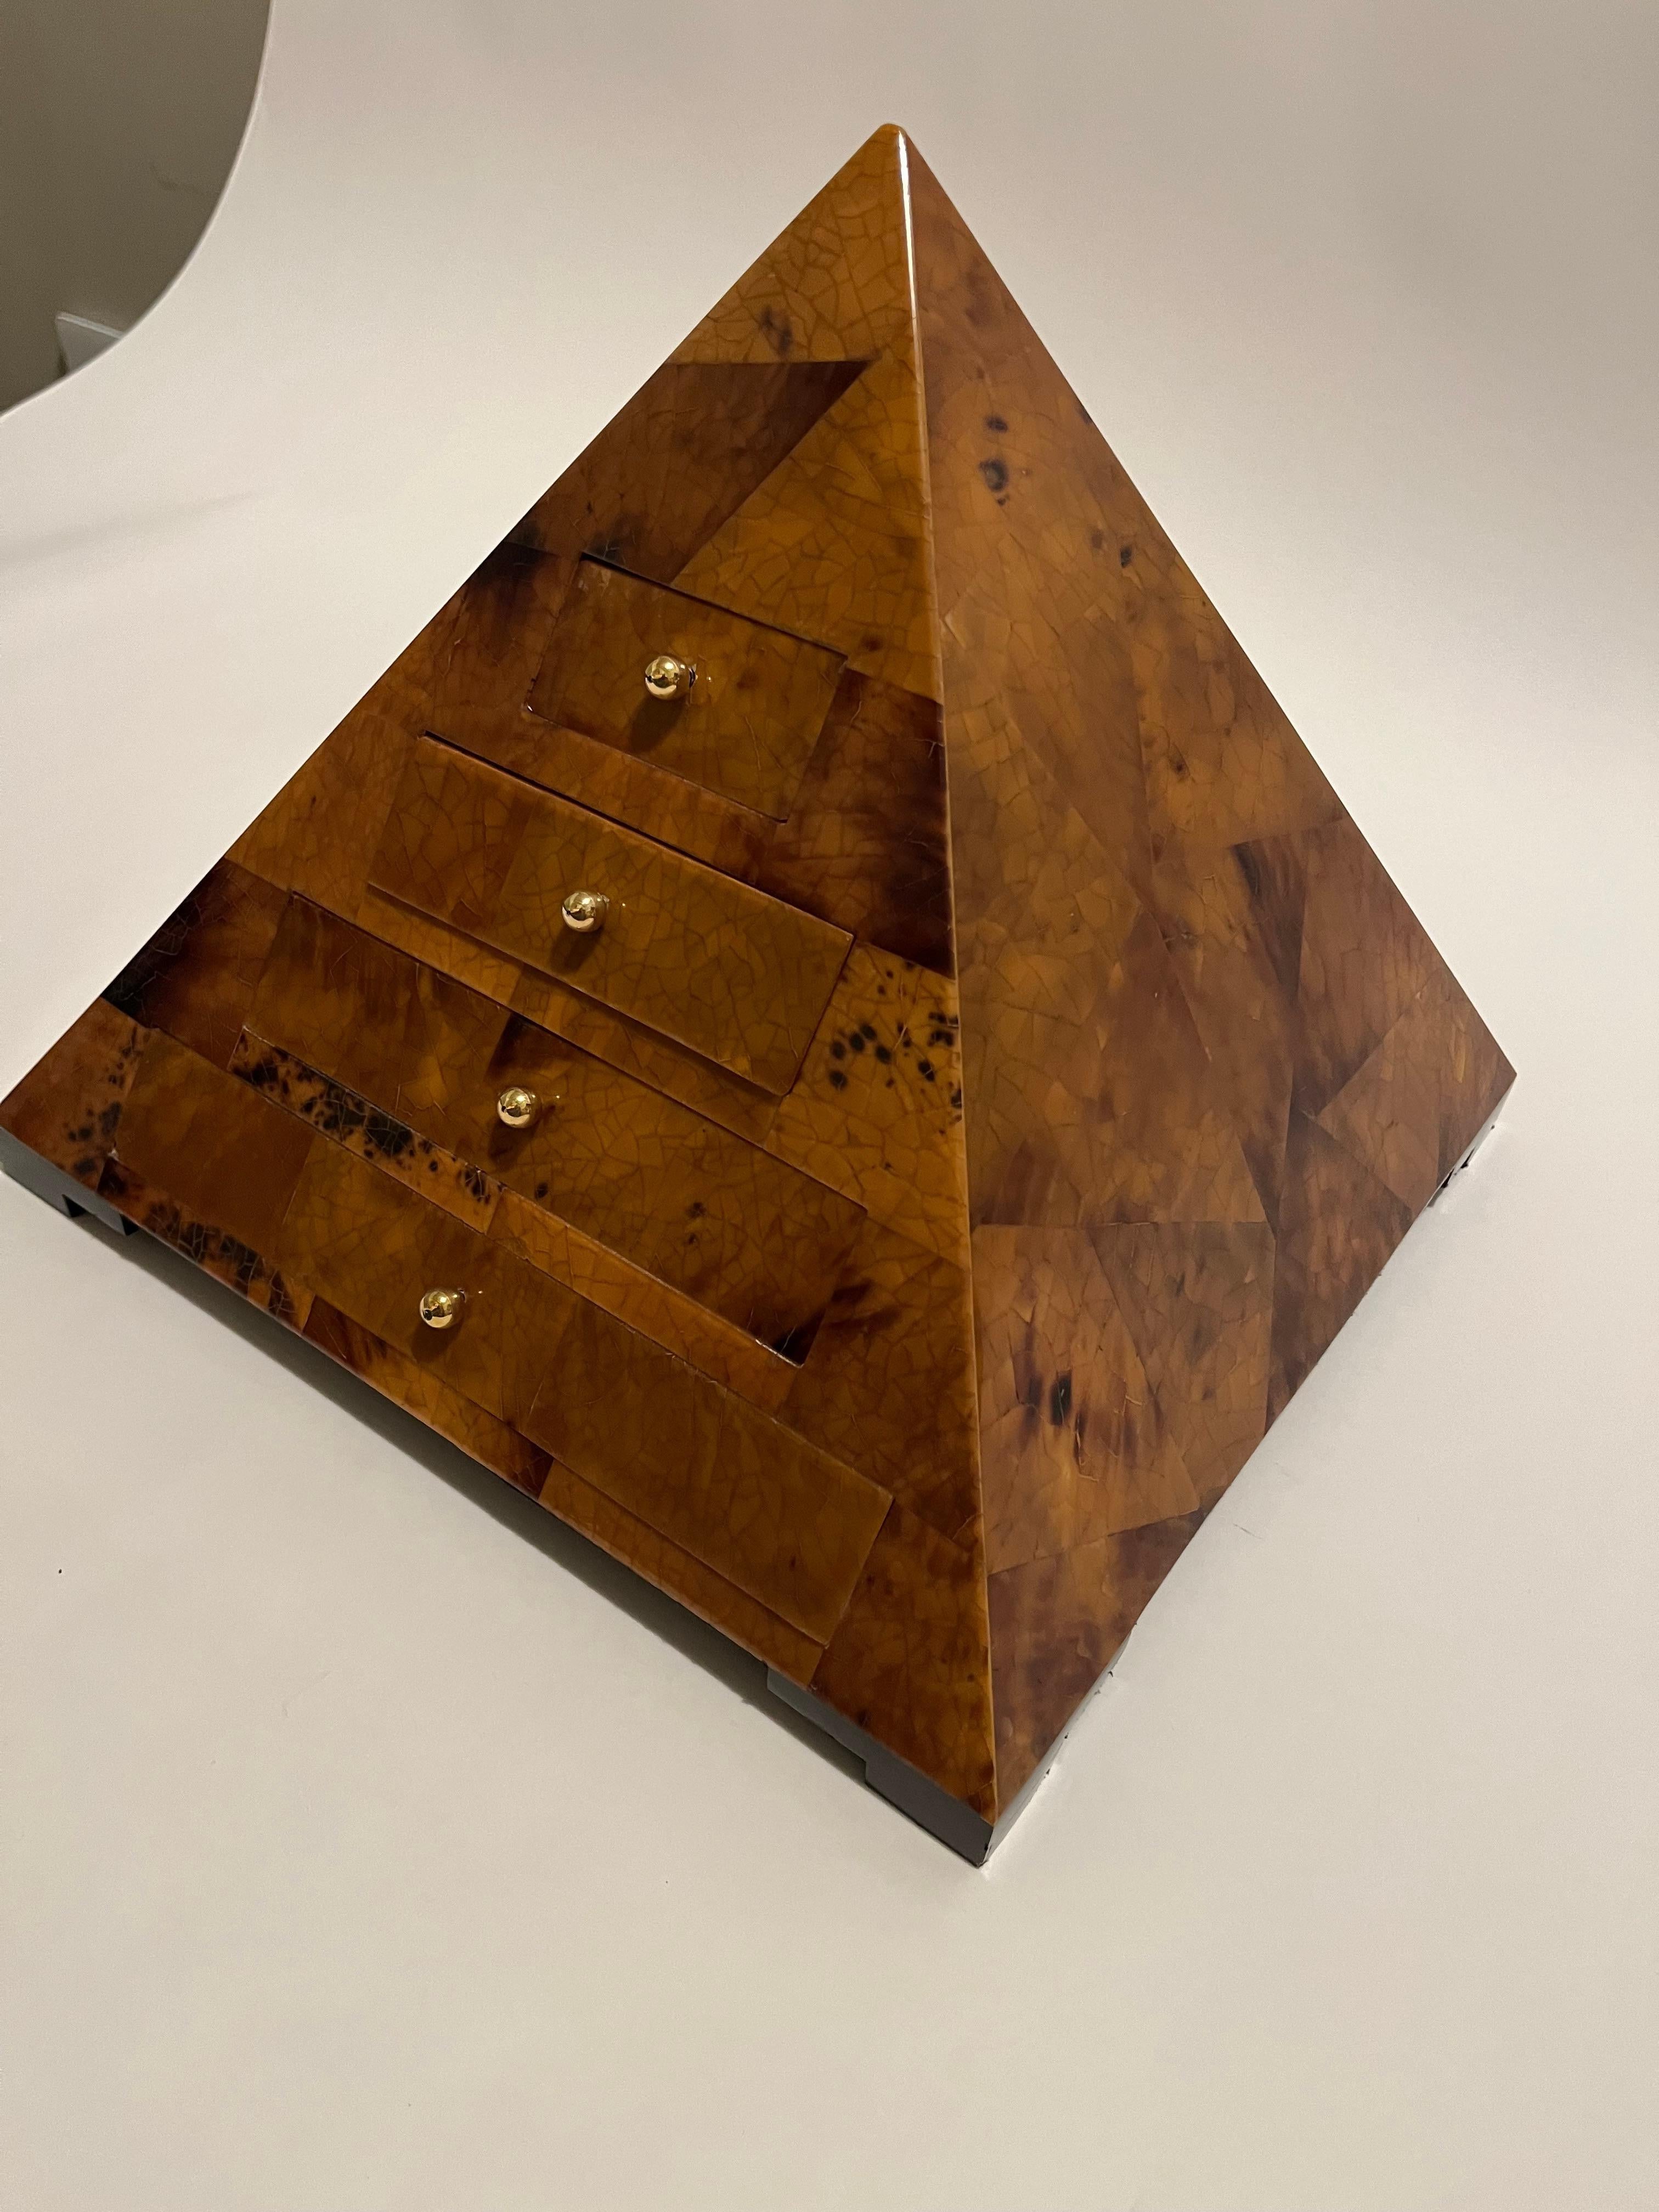 A pyramid shaped box having 4 graduating drawers with brass ball knobs . Made of polished pen shell which is a material that the manufacturer Maitland Smith often used. All sitting upon ogee feet with a felt undersided